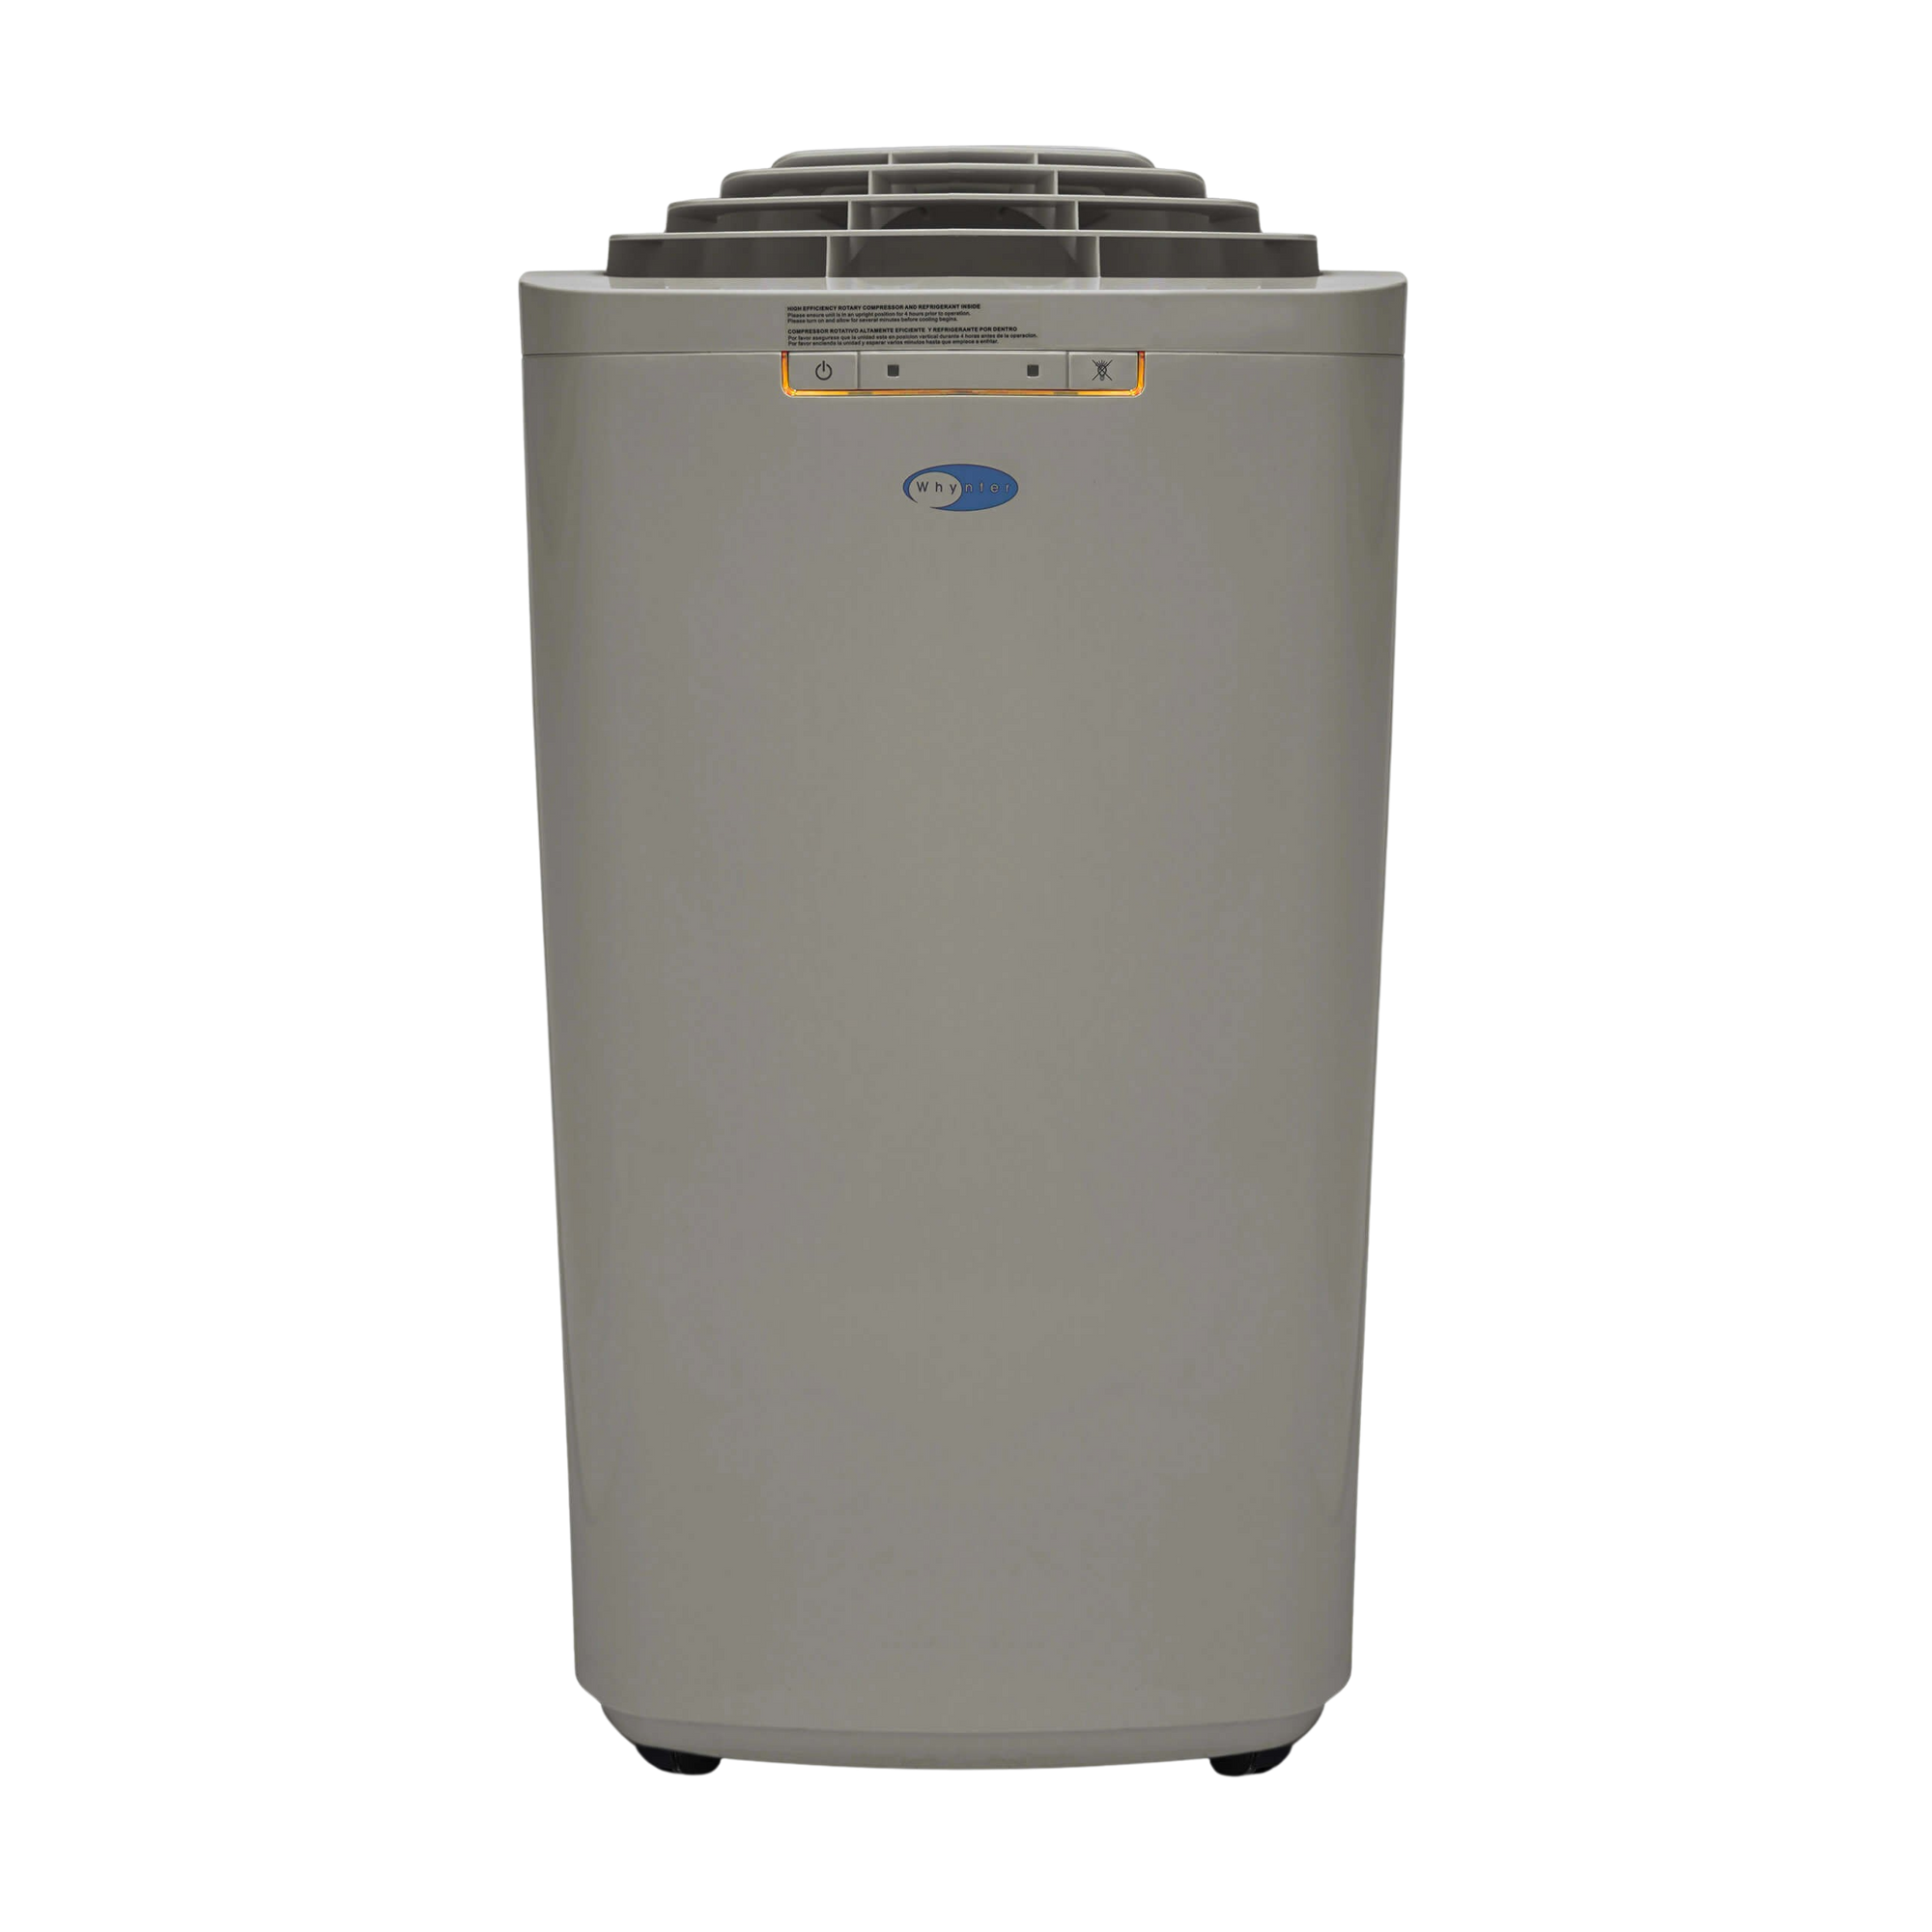 Whynter ARC-131GD 13,000 BTU Dual Hose Portable Air Conditioner with Activated Carbon Filter Gray New